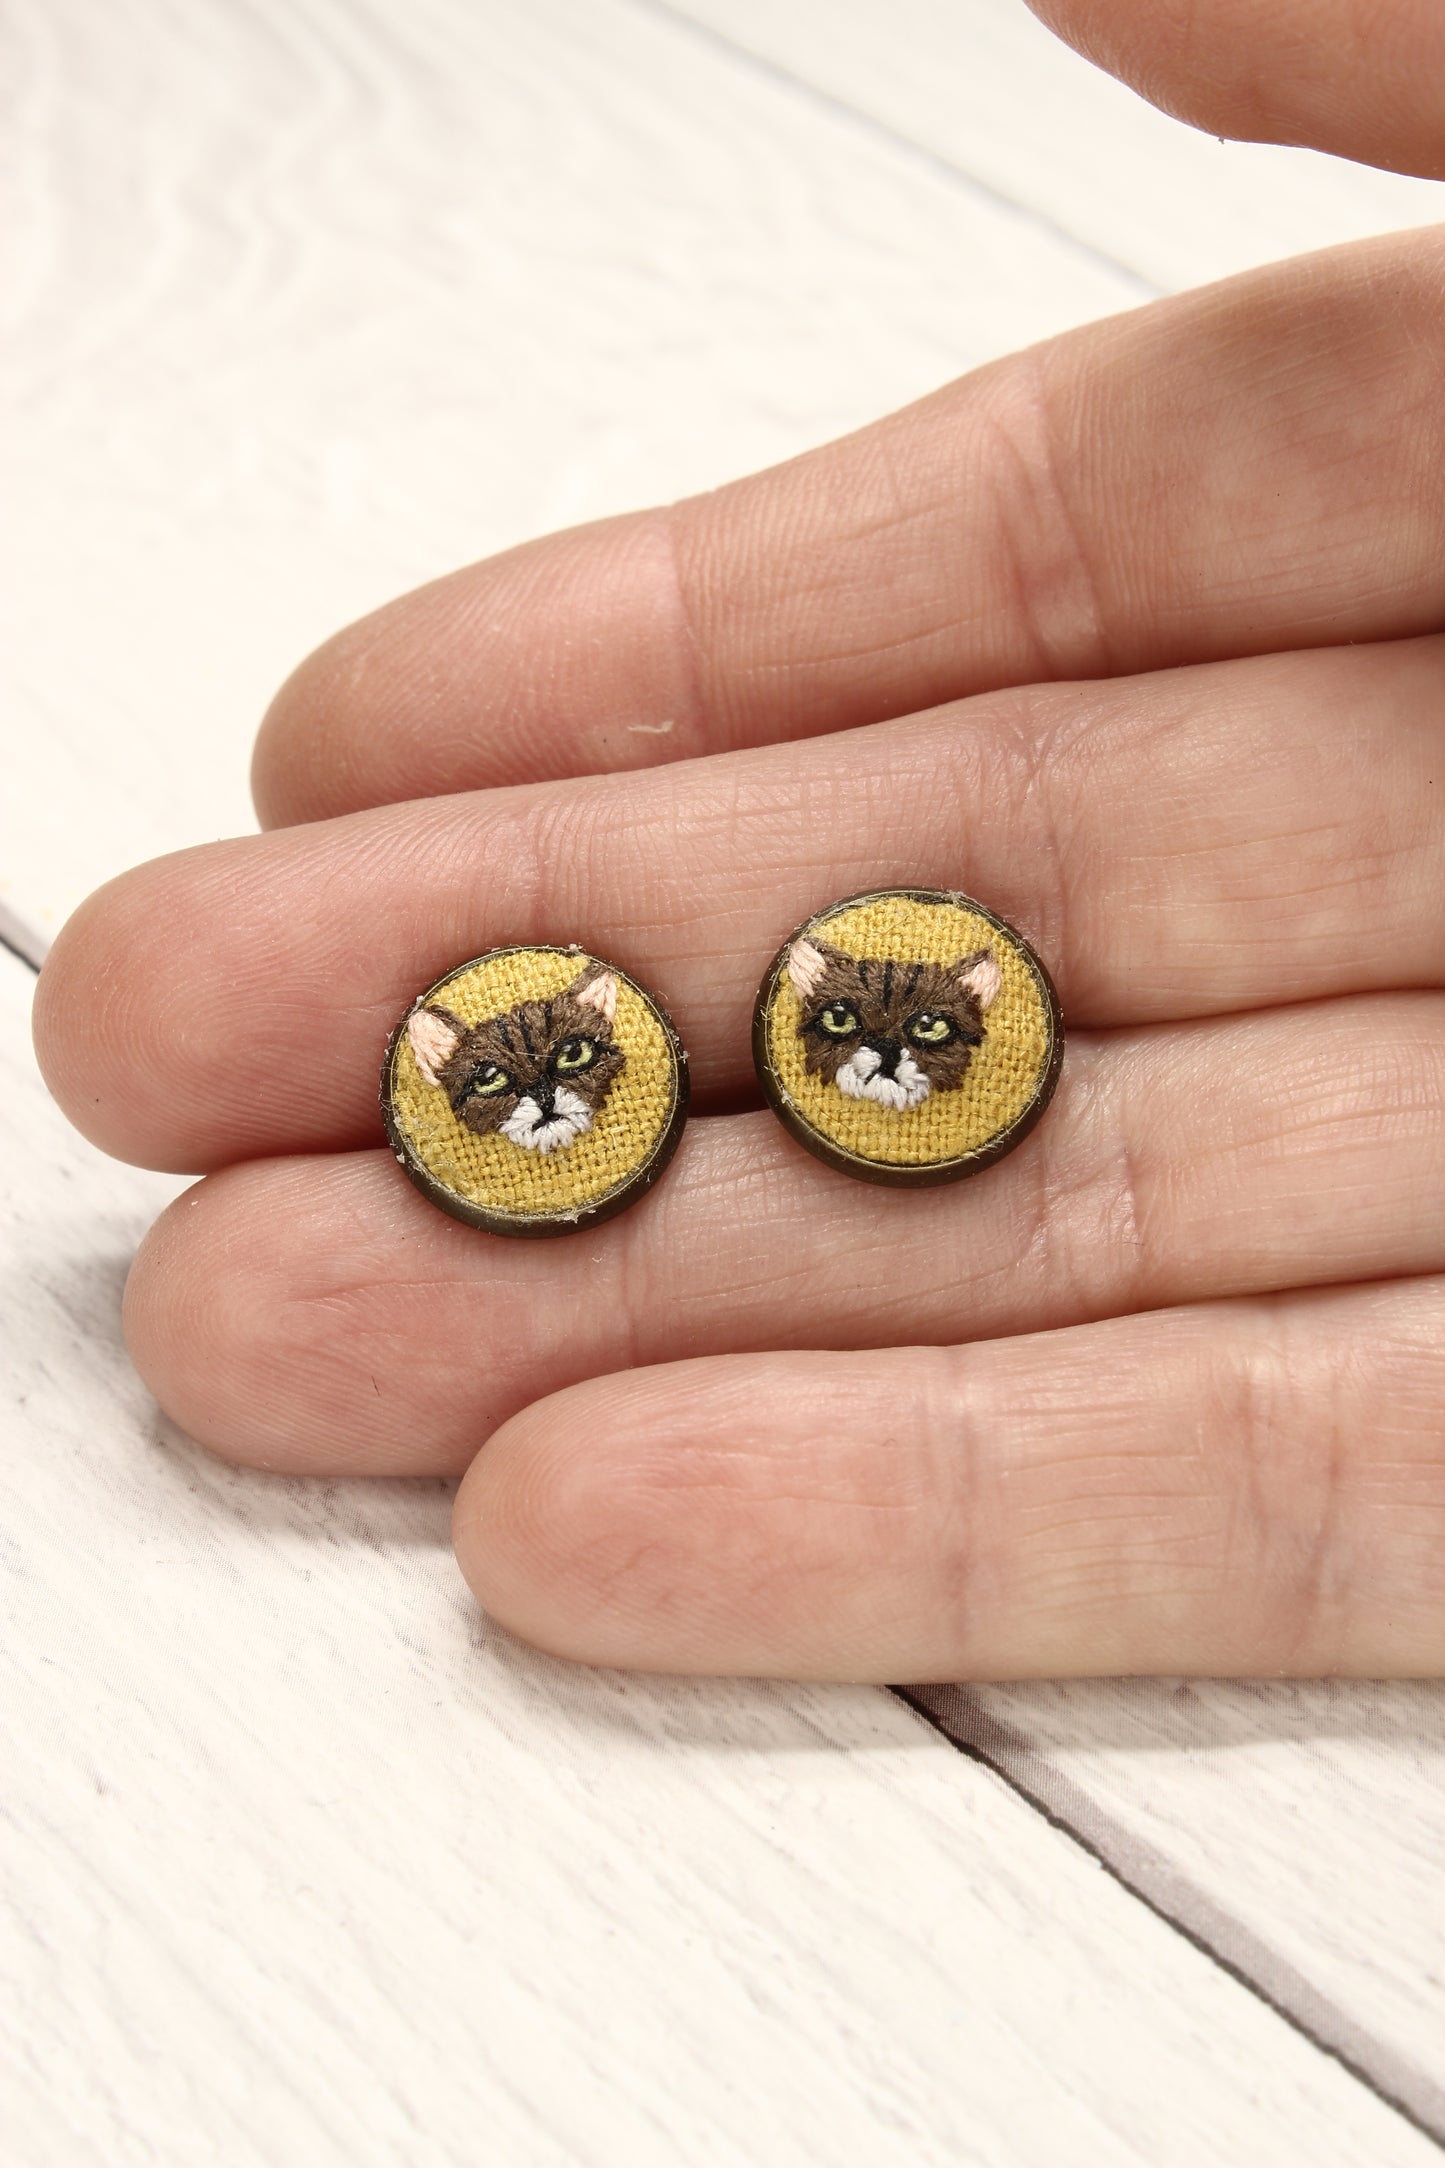 Embroidery Brown & White Cat Studs Earrings